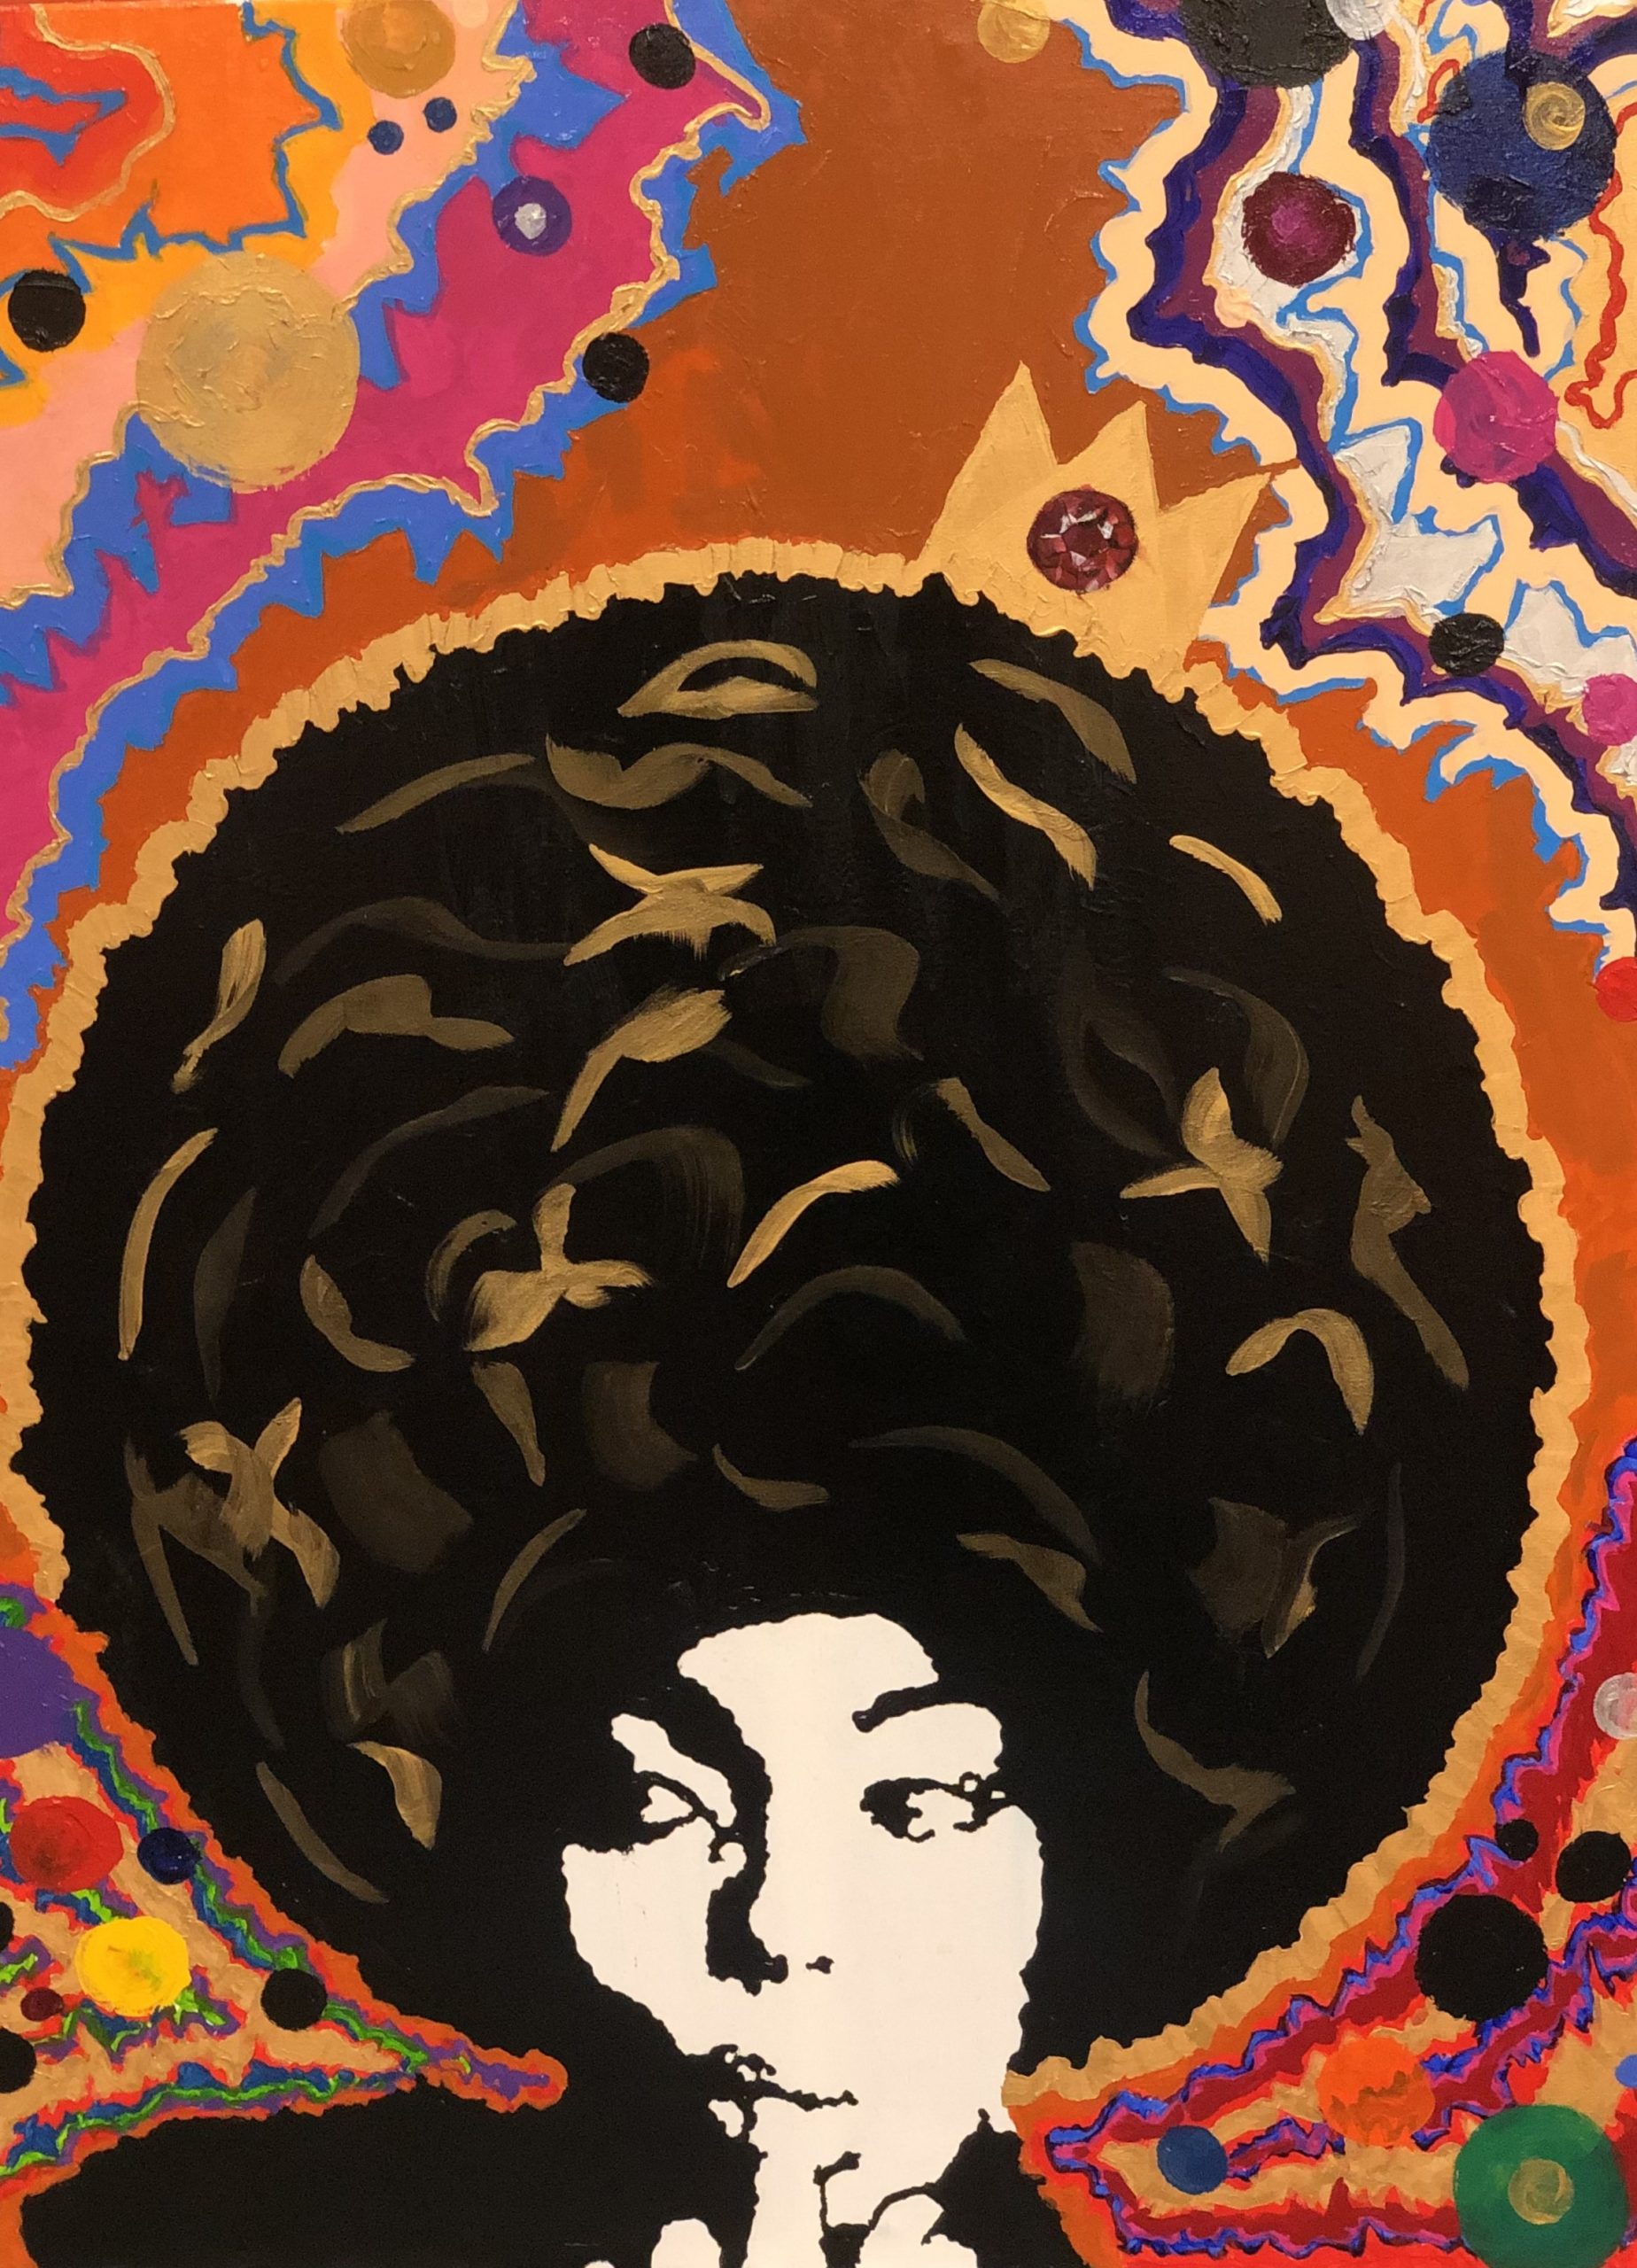 A woman glancing to the left while sucking on her finger. She has a large rounded afro that dominates the middle of the canvas, outlined in gold with a golden crown rest on the upper right of her hair. The background is a mish-mash of different colored shapes on a flat orange base.